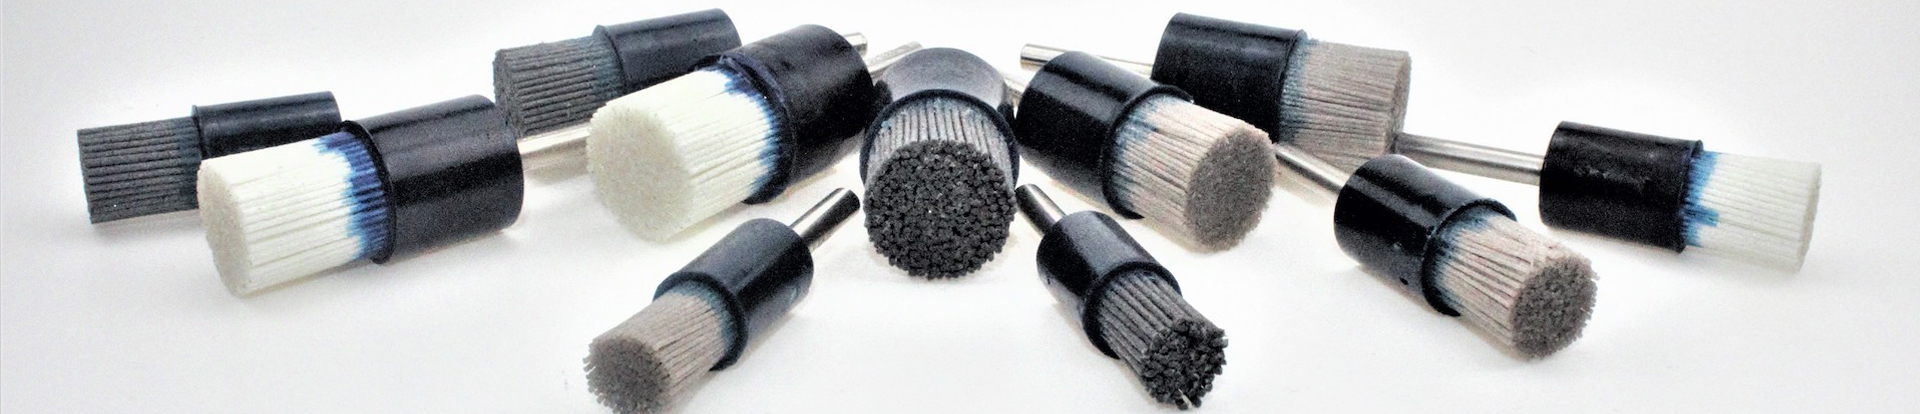 Differentiating Types and Applications of Industrial Brushes from Manufacturing Processes